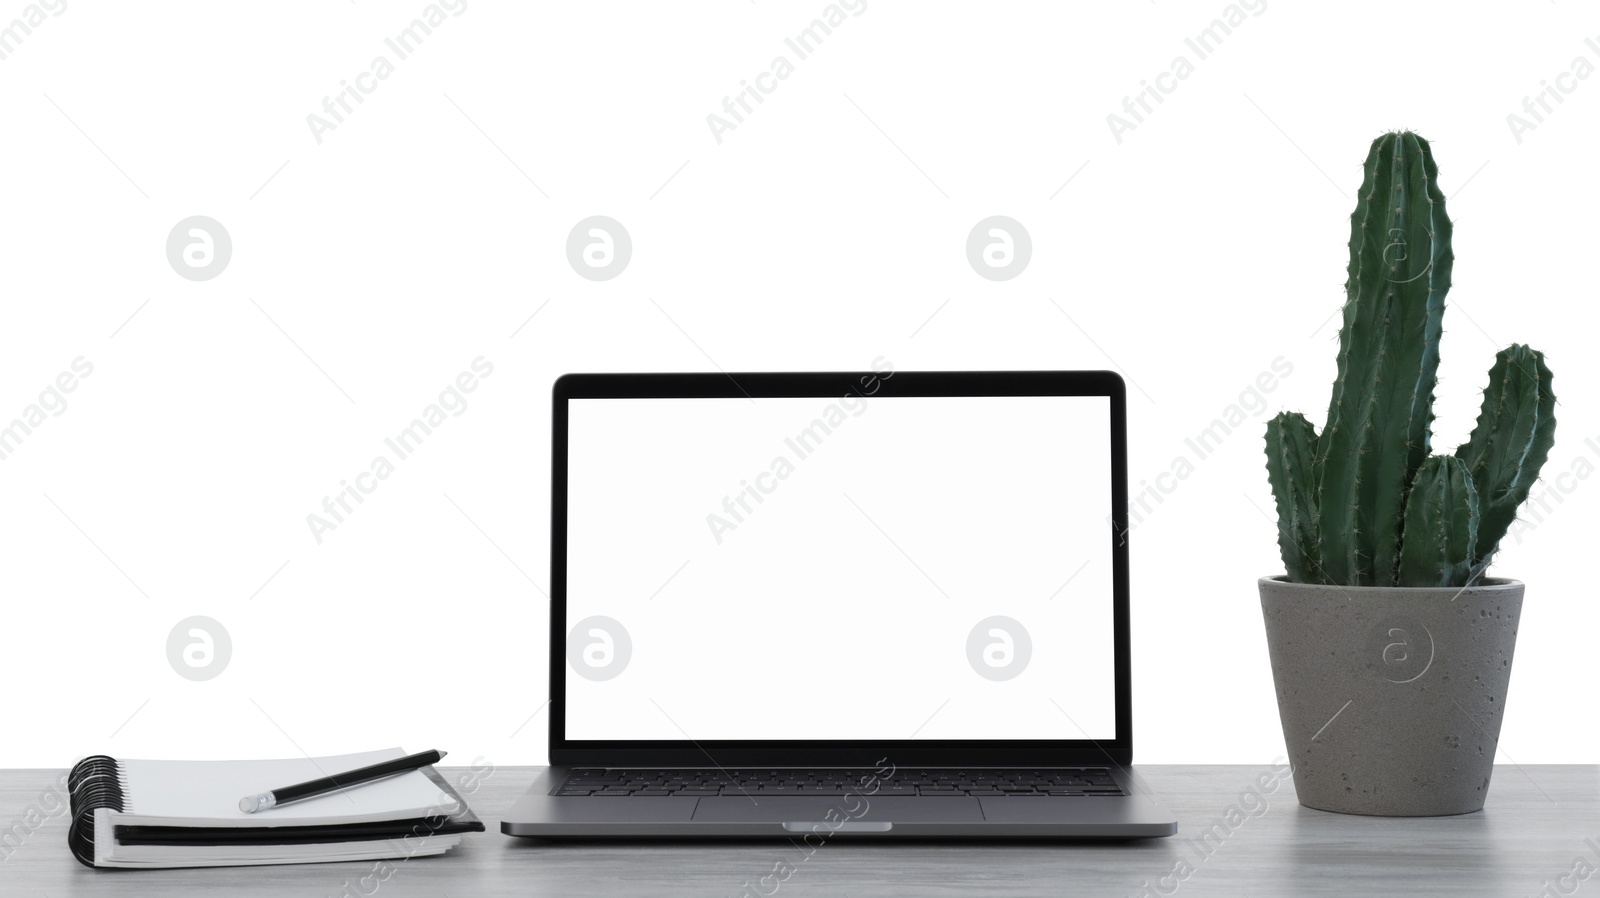 Photo of Laptop, potted cactus and notebook on table against white background. Stylish workplace